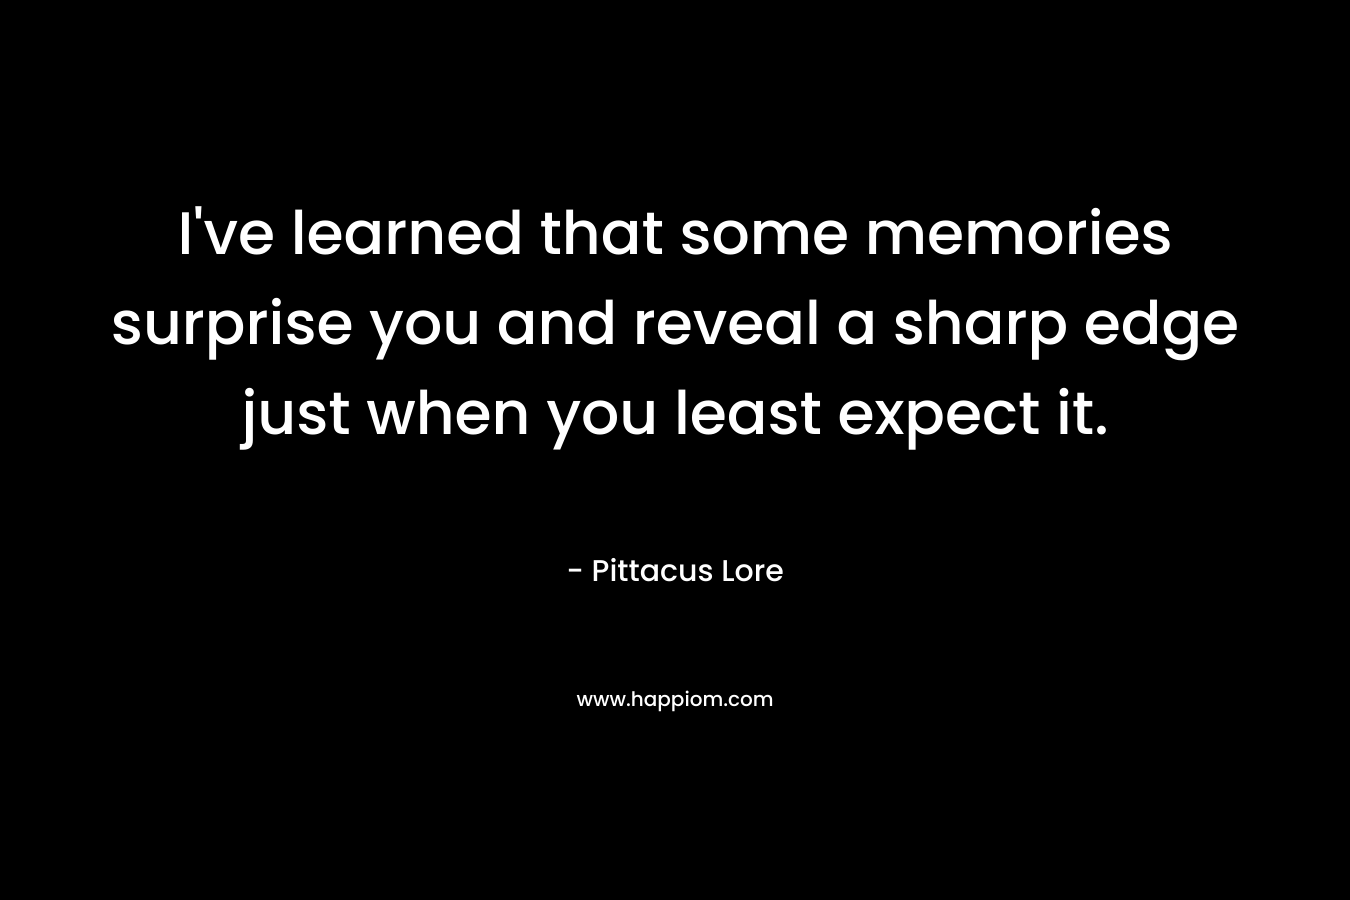 I've learned that some memories surprise you and reveal a sharp edge just when you least expect it.